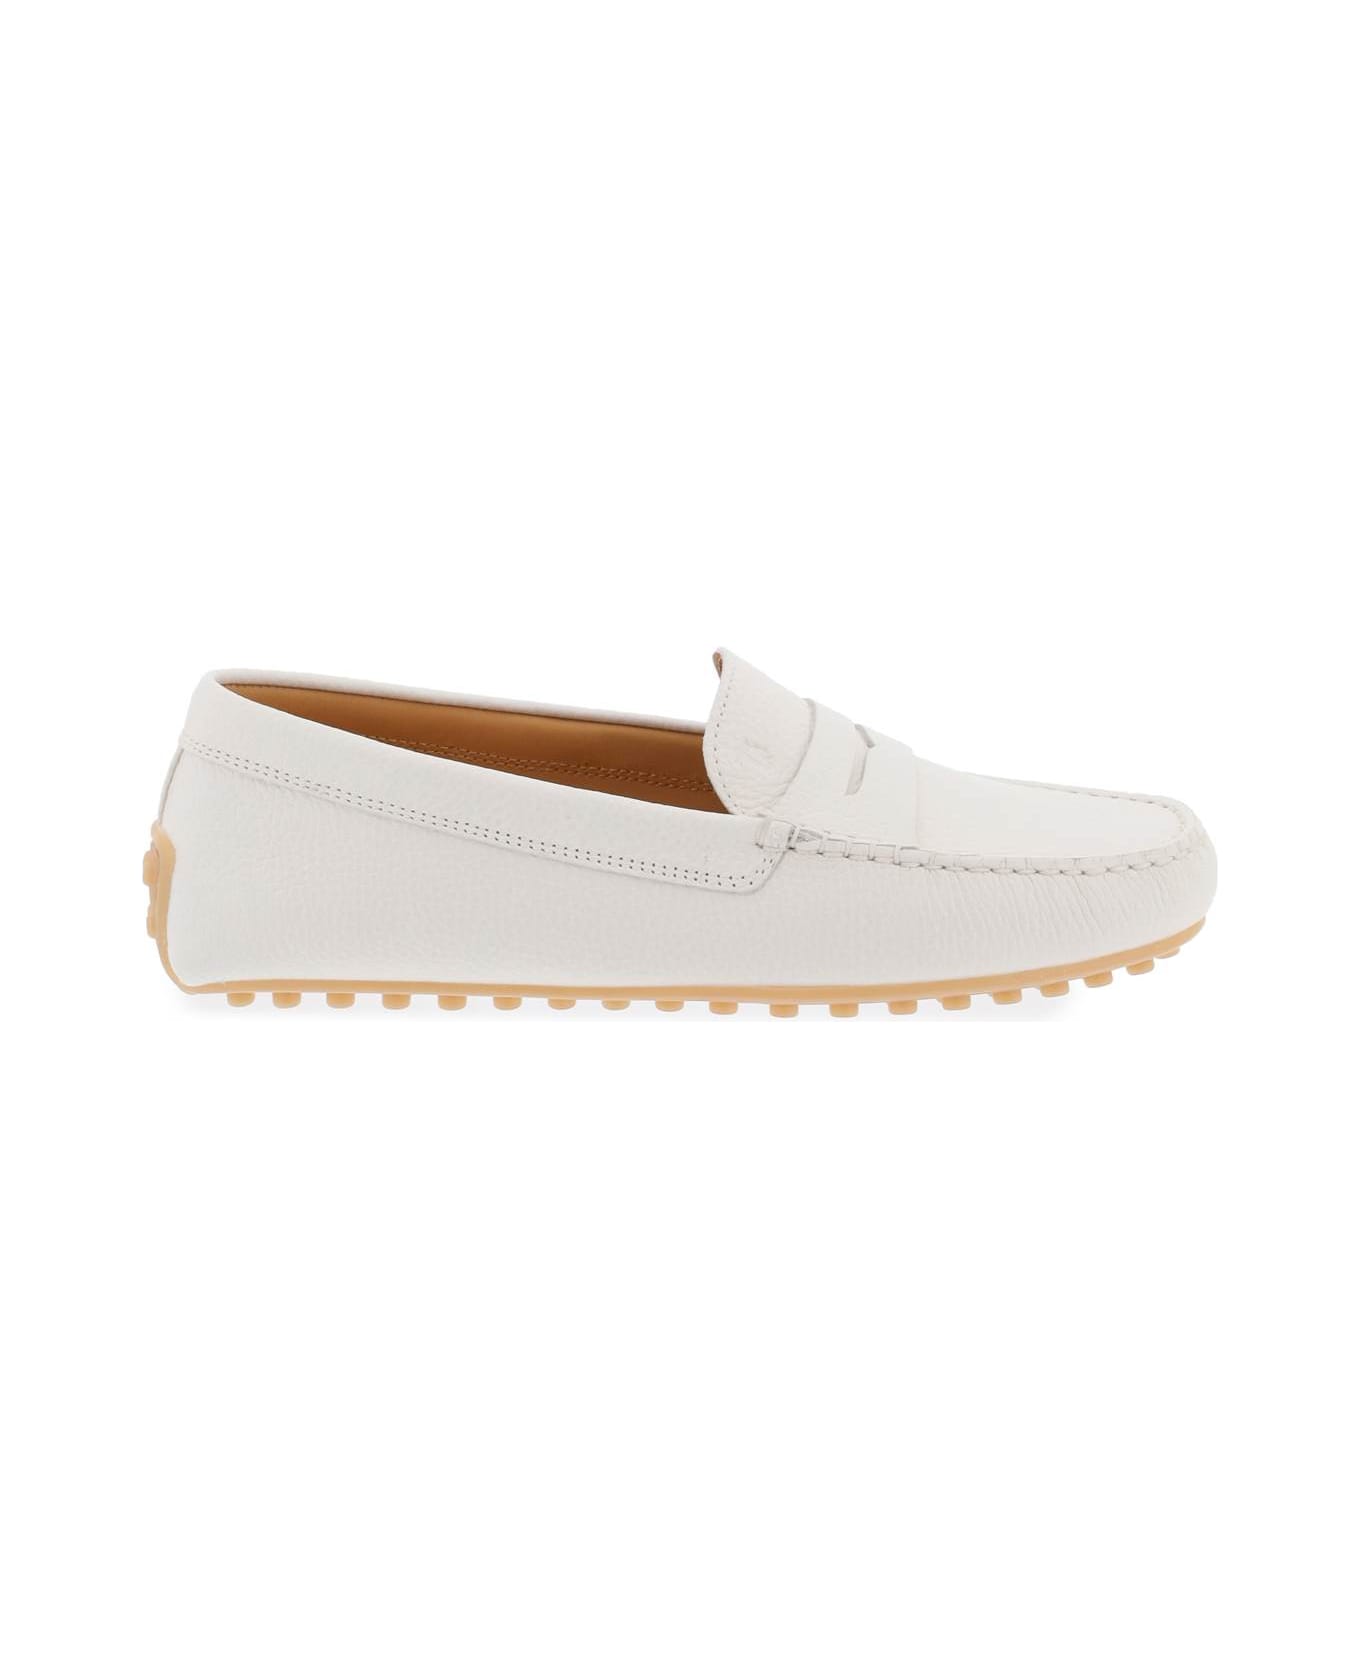 Tod's City Gommino Leather Loafers - MOUSSE (White)